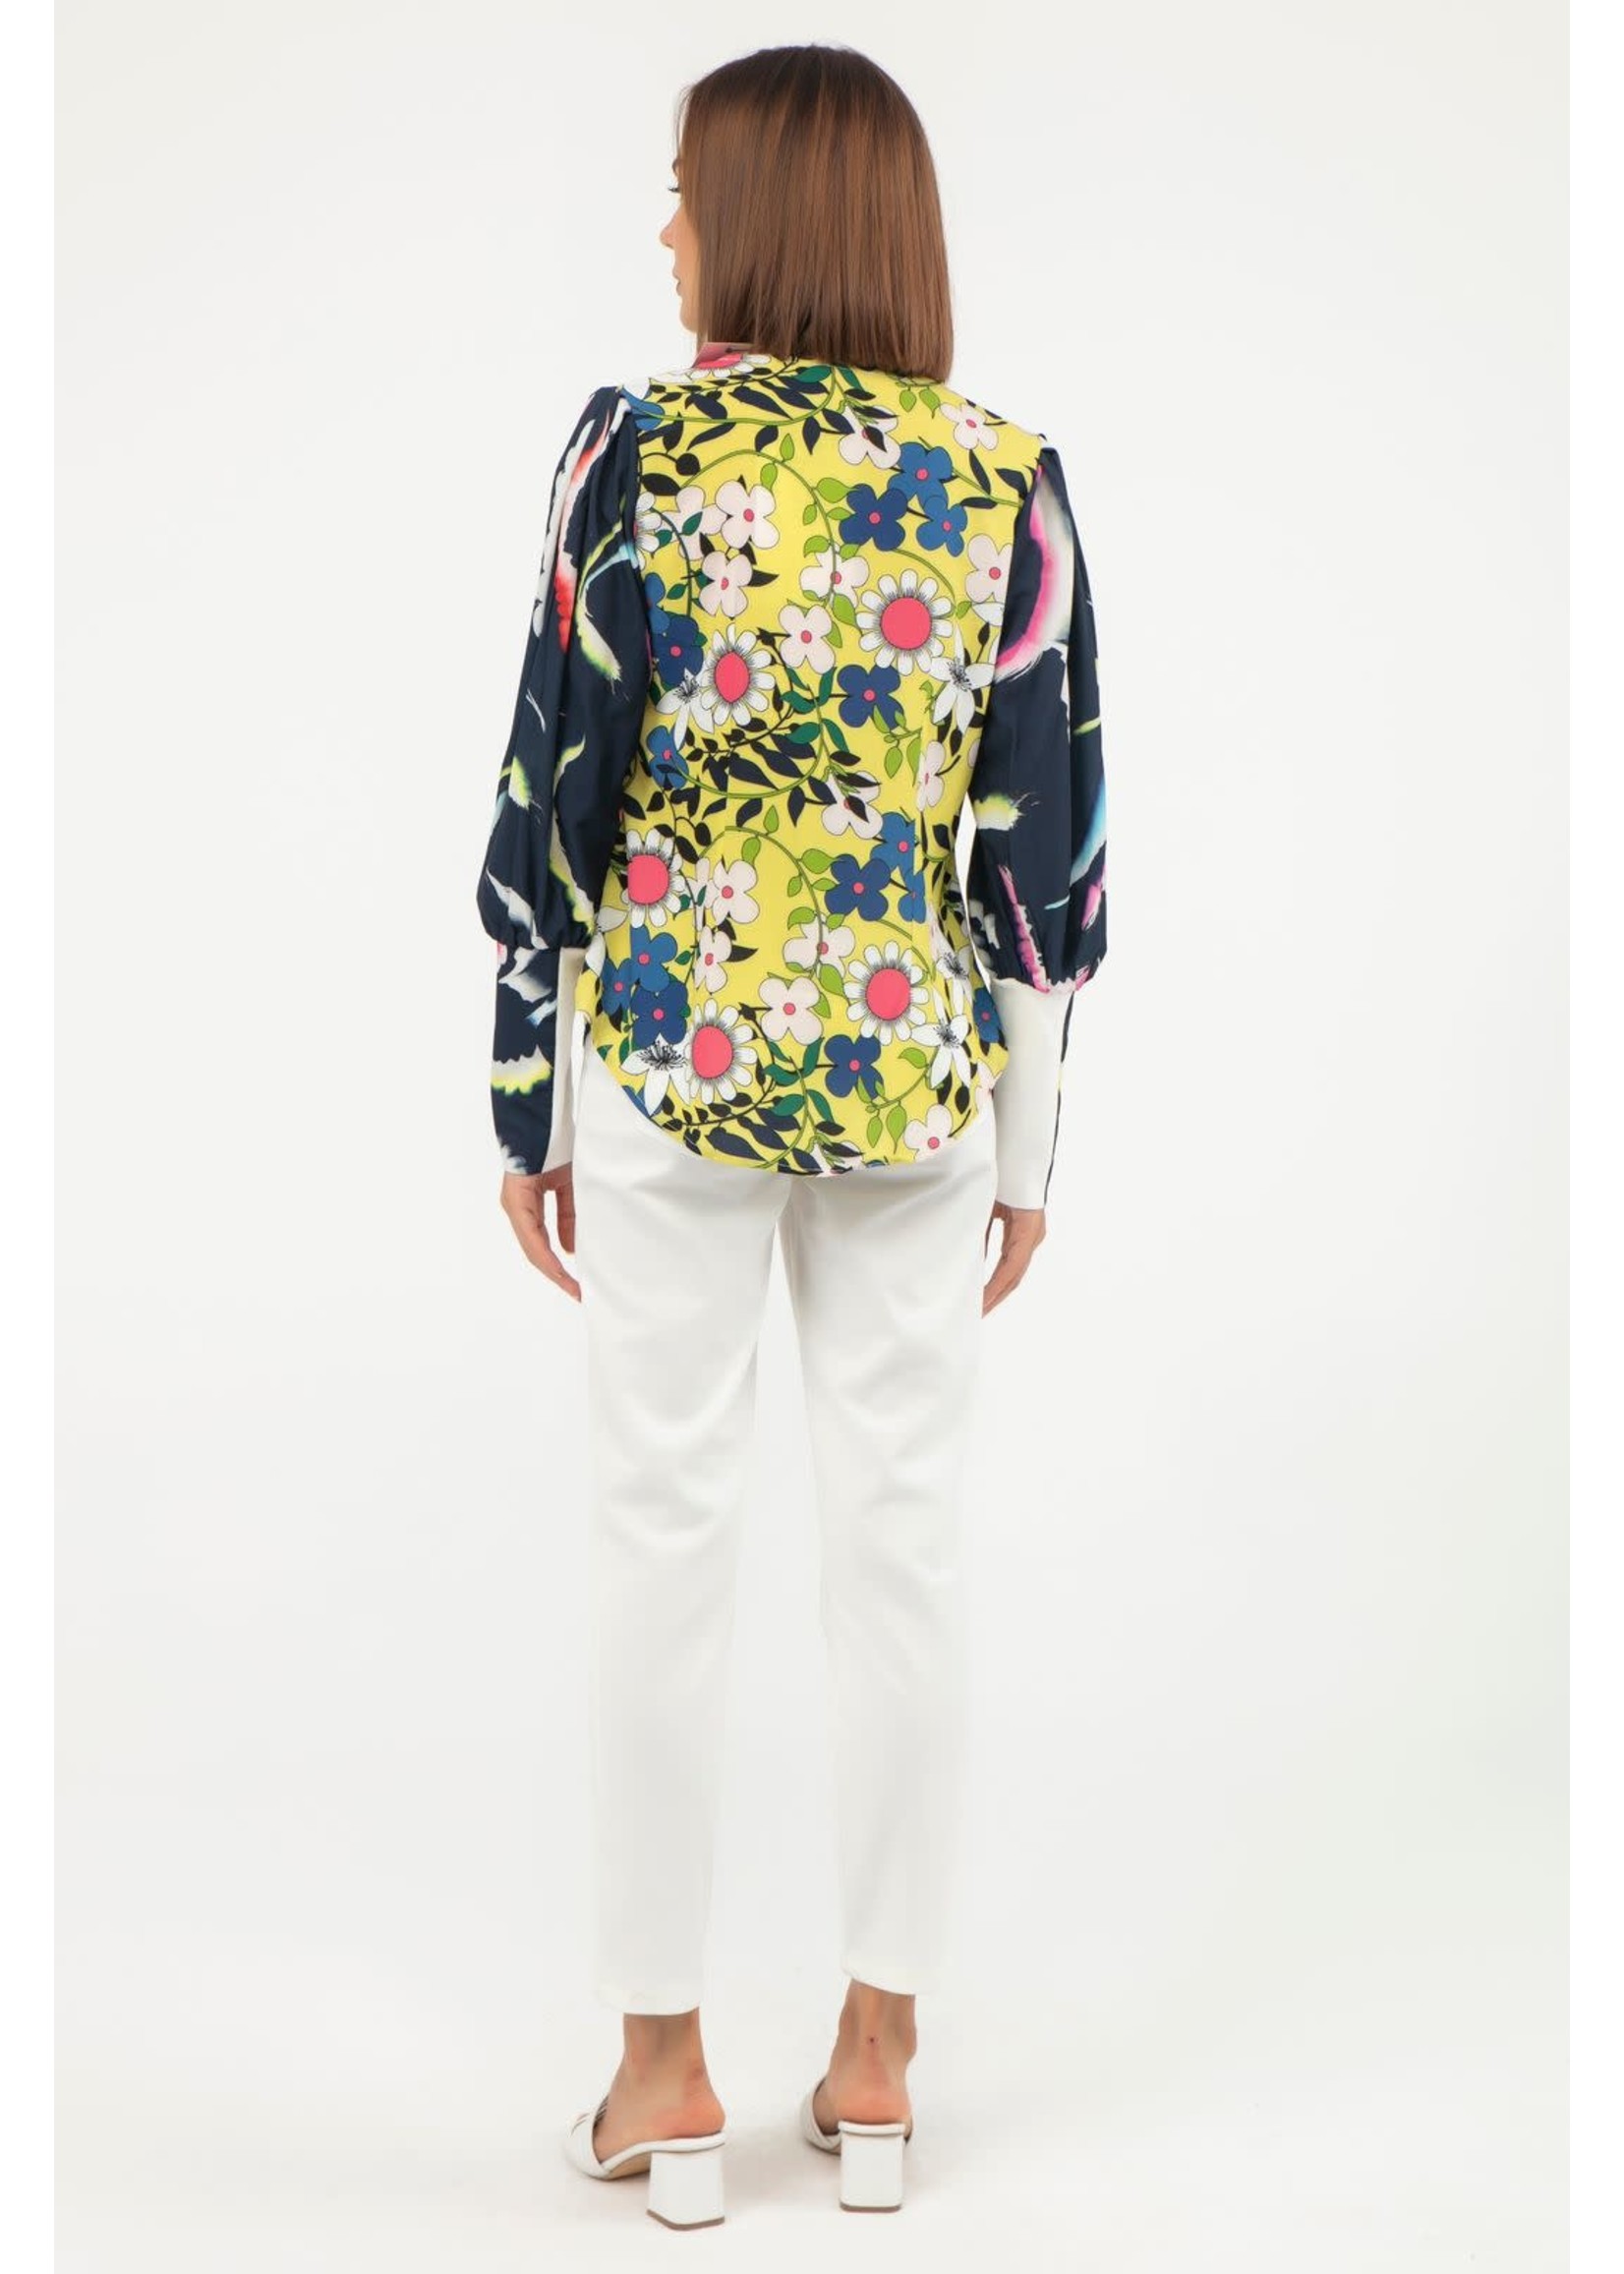 ISLE Post Sleeve Top (French Floral)